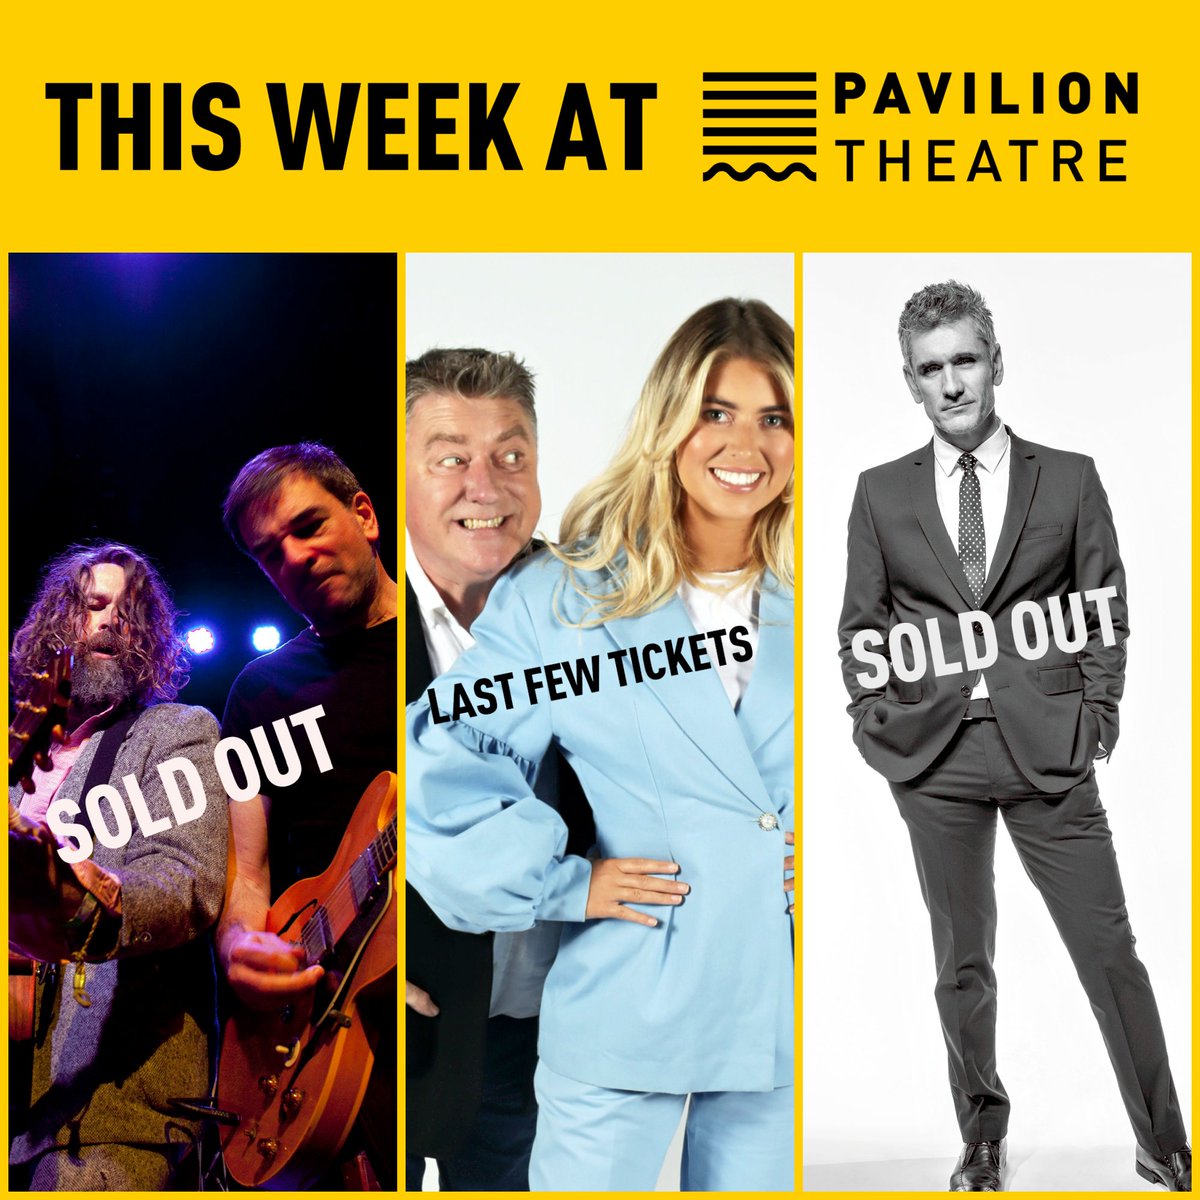 📢 This week at Pavilion Theatre: THURS: @hothouseflowers, @headlineagency - SOLD OUT FRI: Hothouse Flowers - SOLD OUT SAT: @Pat_Shortt and @faye_shortt - Last Few Tickets SUN: @curtisstigers, @TEGMJREire - SOLD OUT Tickets are available to purchase at paviliontheatre.ie/events